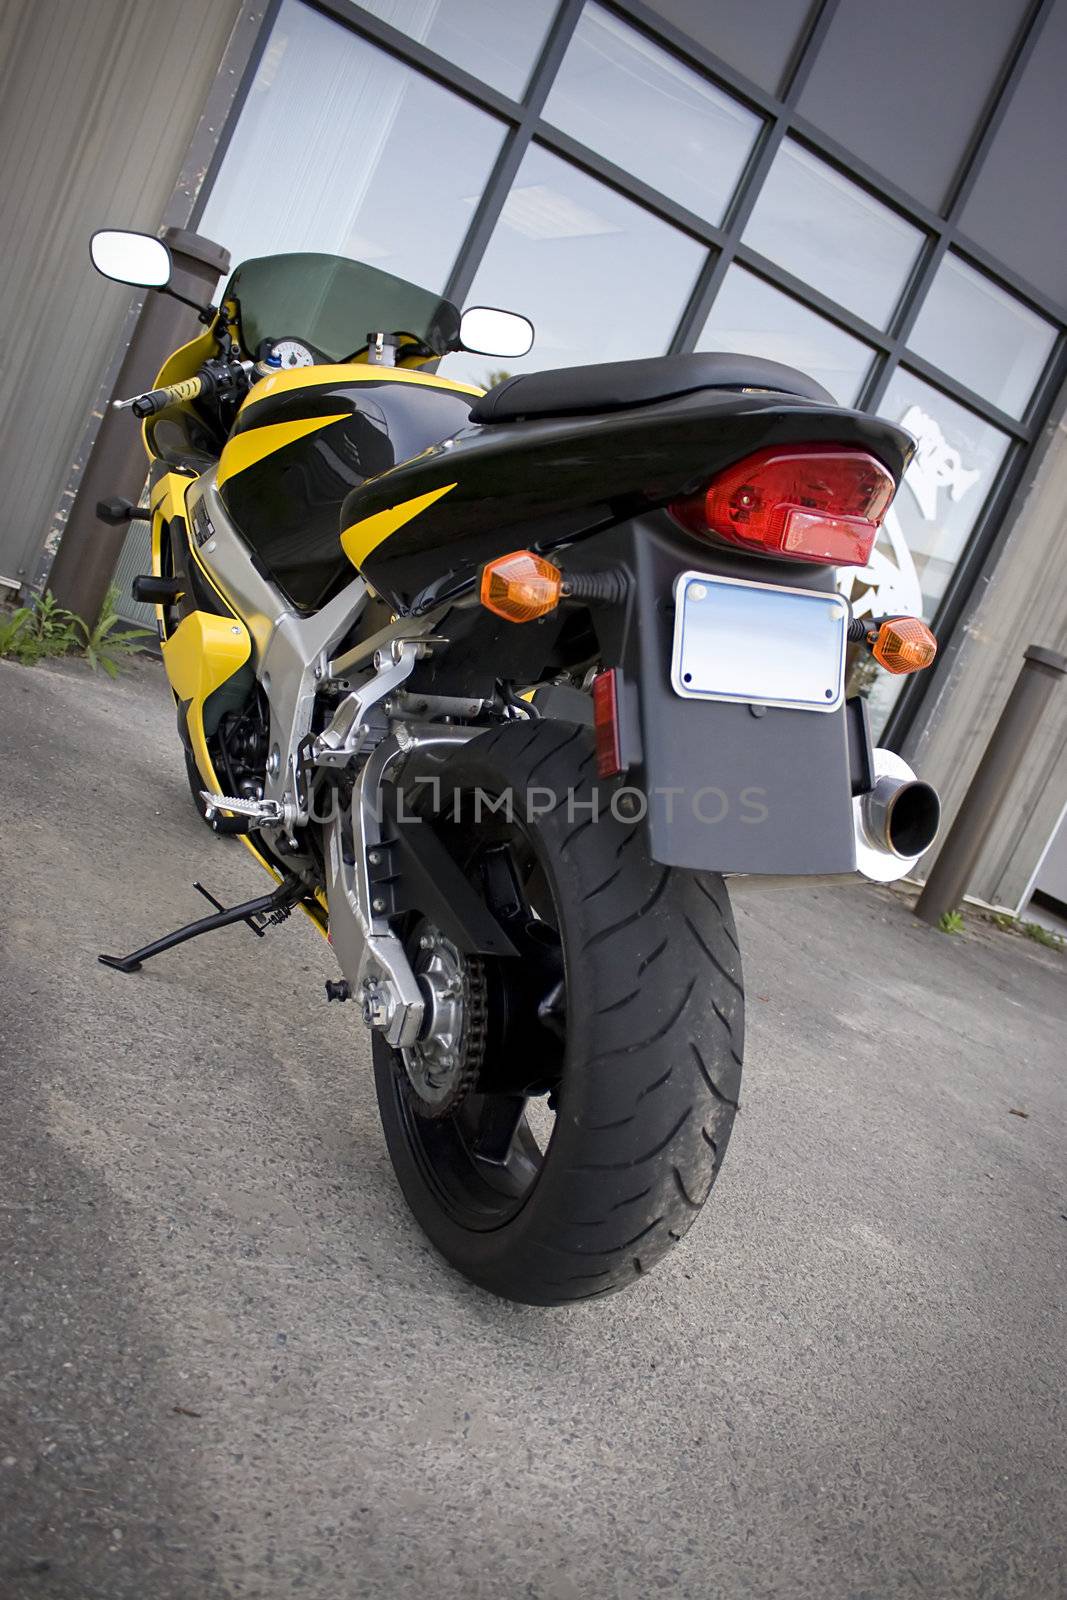 The rear view of a modern yellow motorcycle.